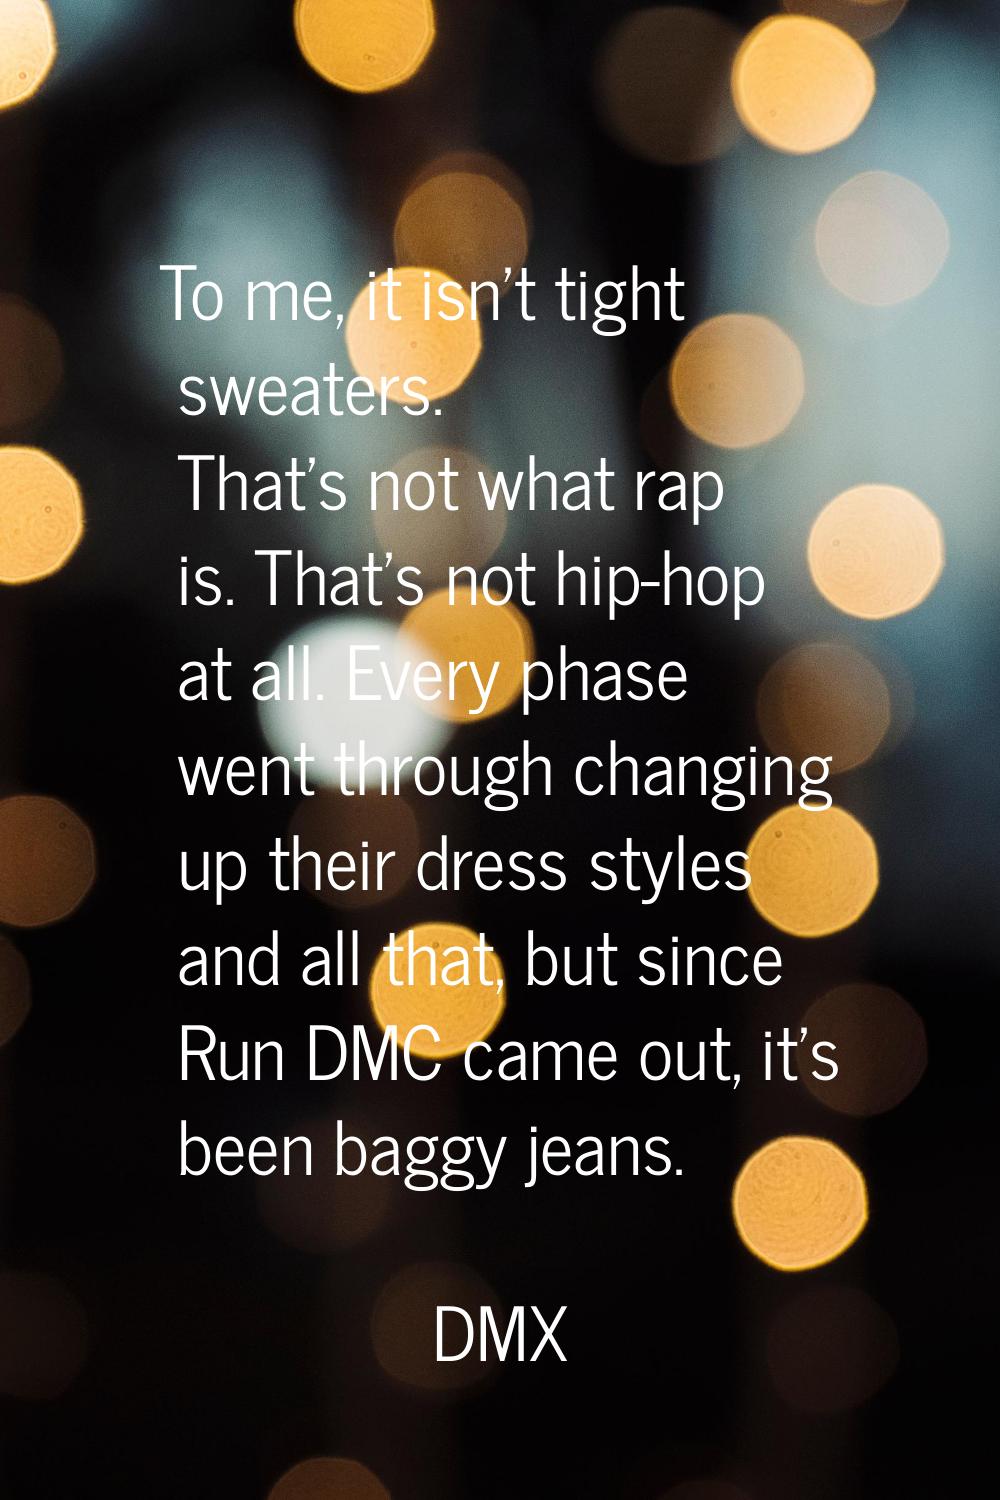 To me, it isn't tight sweaters. That's not what rap is. That's not hip-hop at all. Every phase went